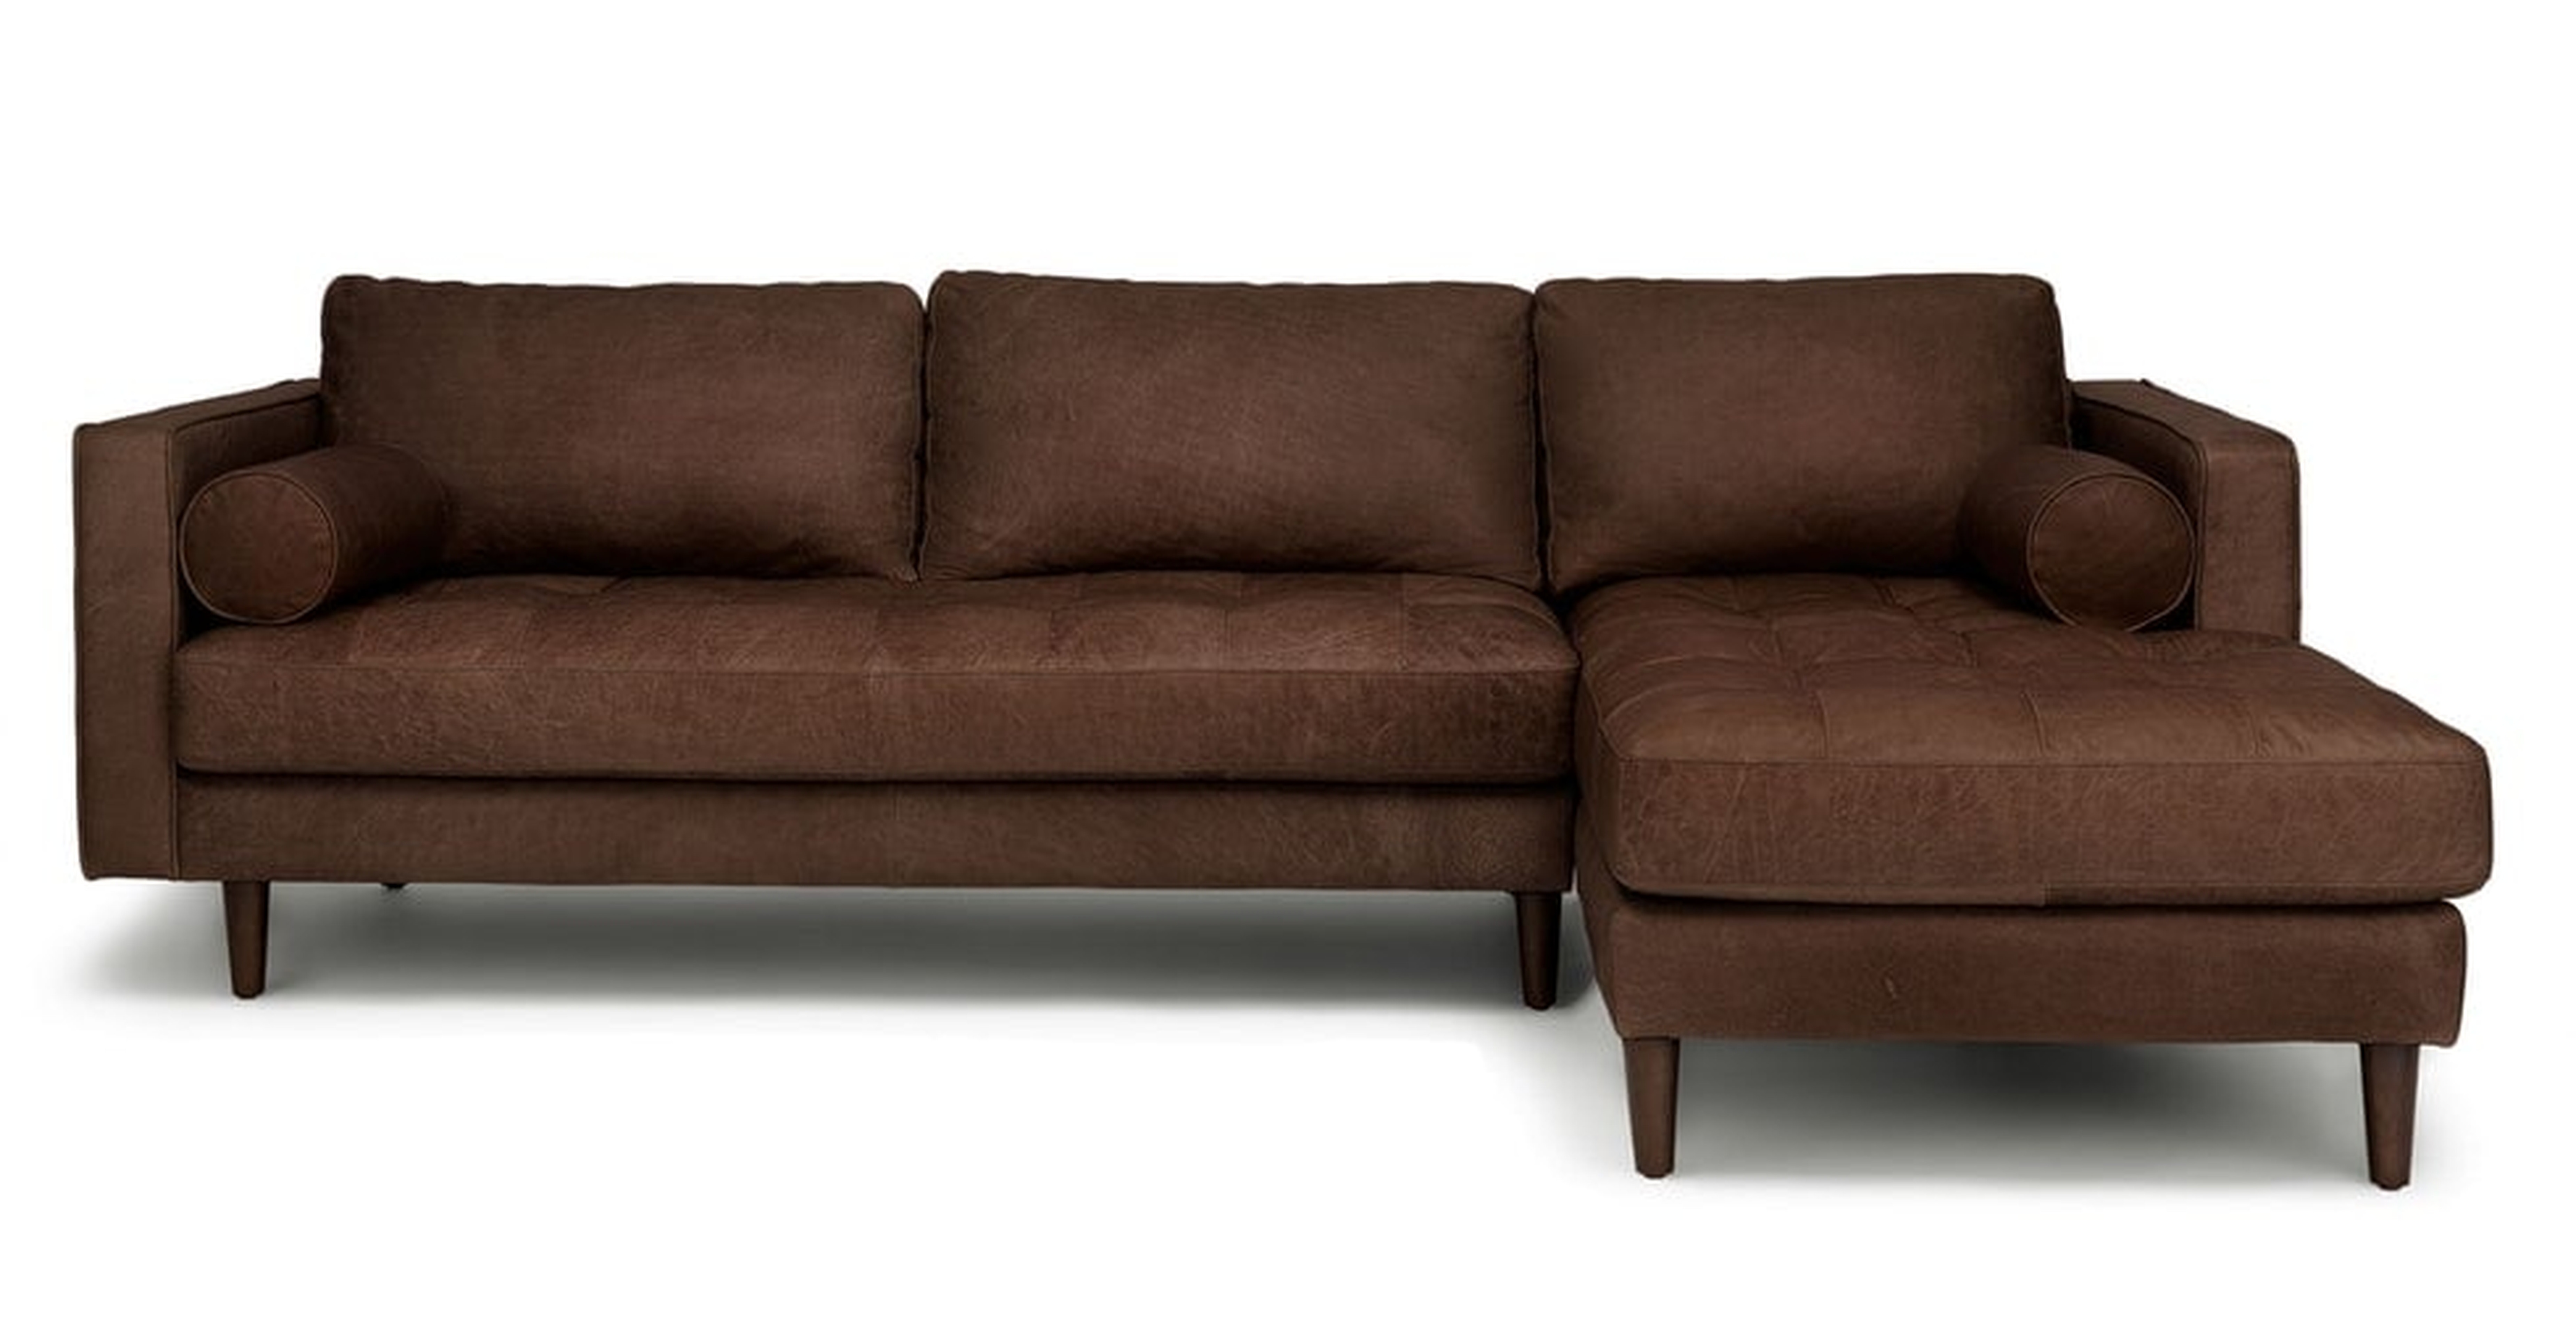 Sven Charme Chocolat Right Sectional Sofa - Article